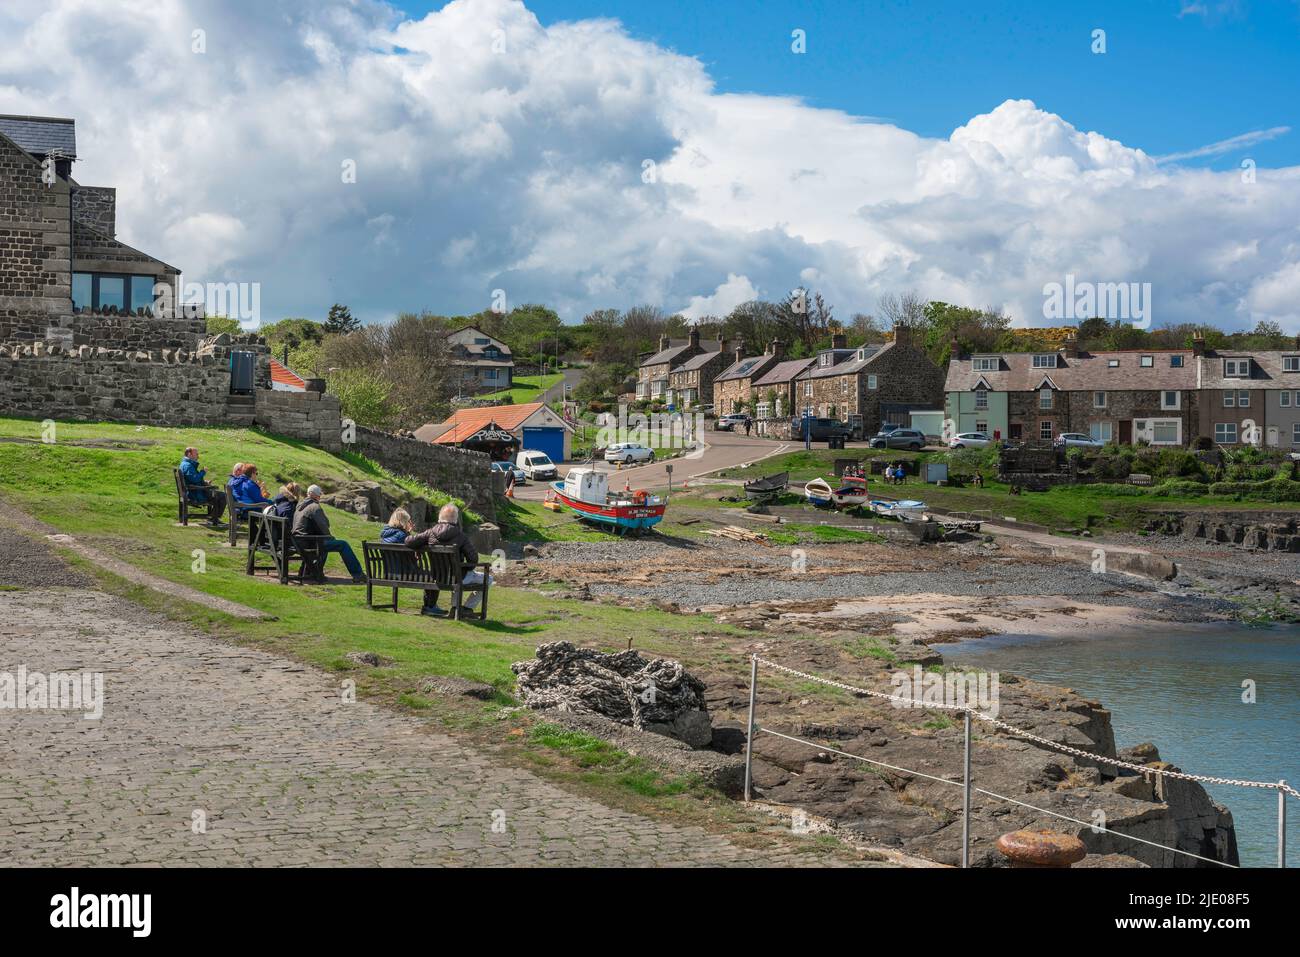 Craster Northumberland, view in summer of people sitting on benches enjoying the view of the scenic harbour in Craster on the Northumberland coast, UK Stock Photo